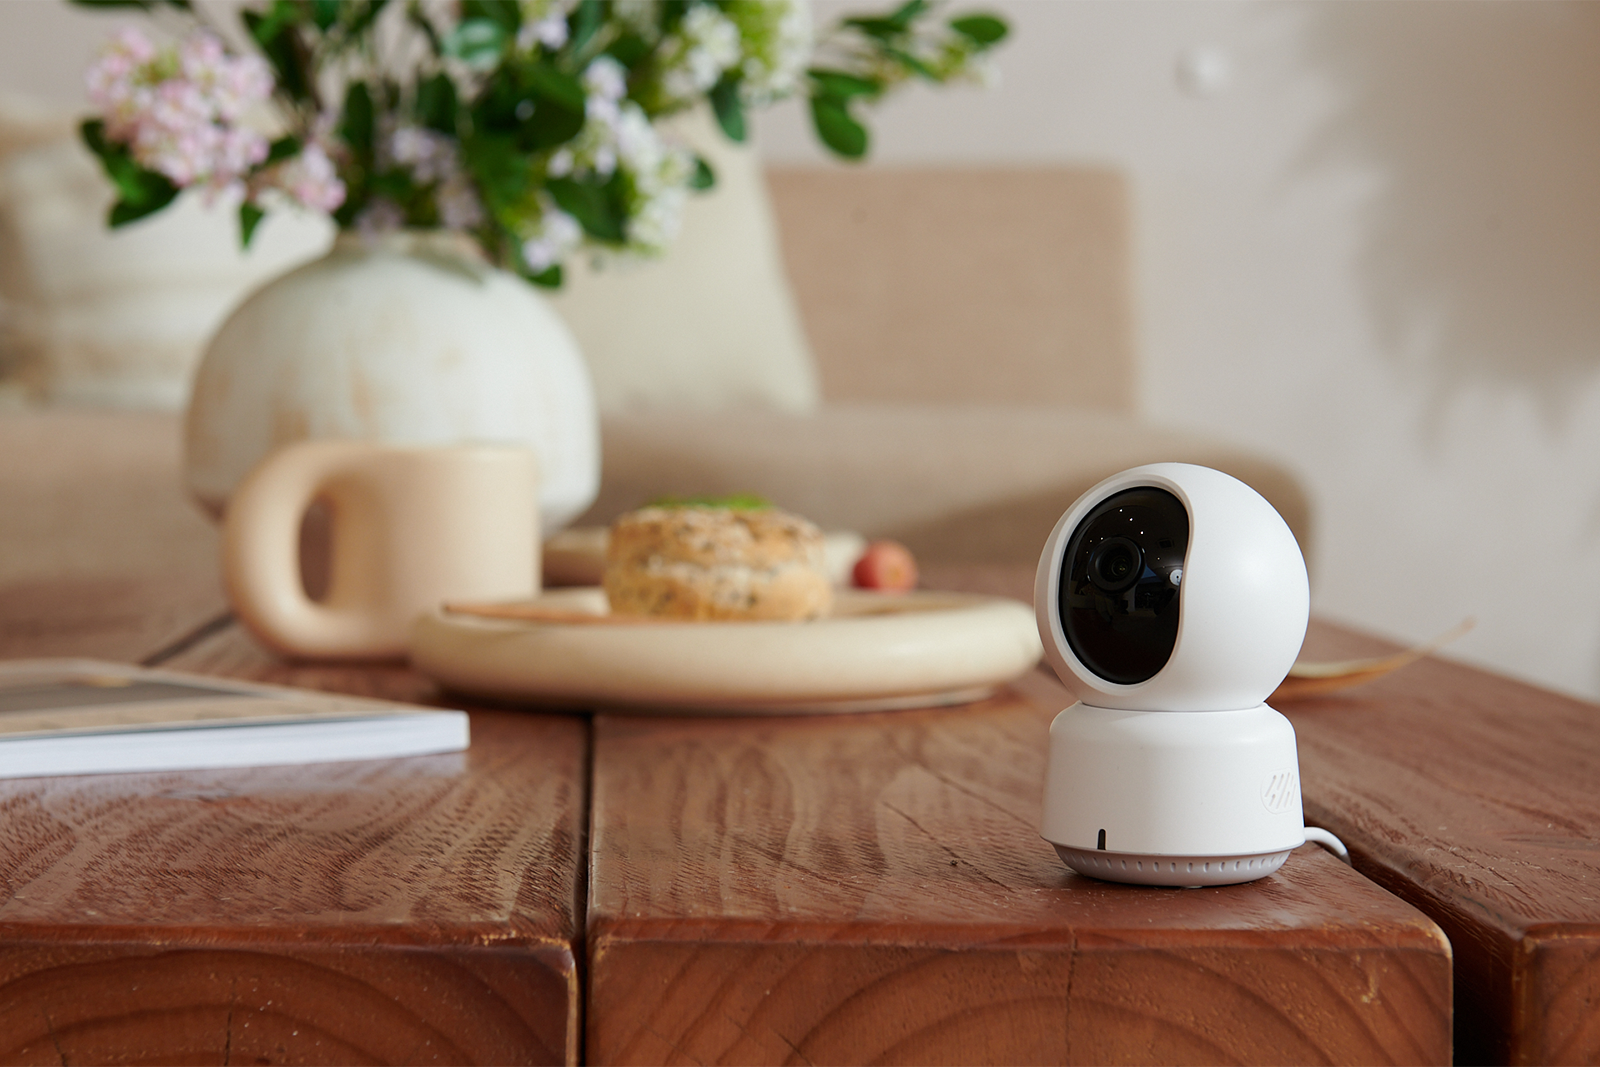 Add indoor security to your home with the Aqara Camera E1